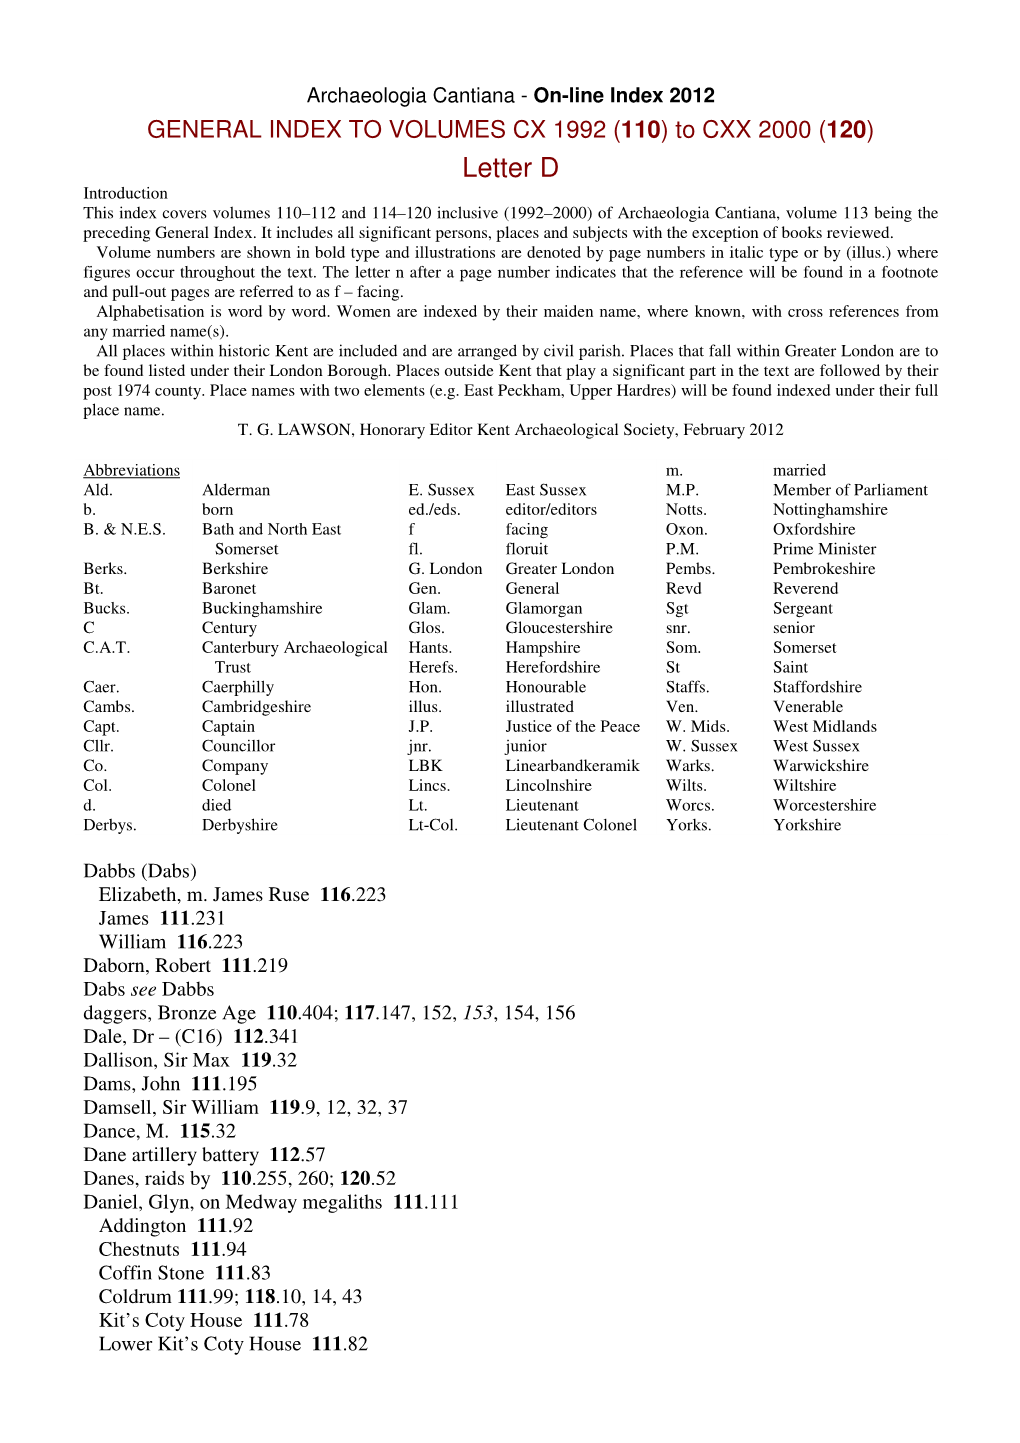 Letter D Introduction This Index Covers Volumes 110–112 and 114–120 Inclusive (1992–2000) of Archaeologia Cantiana, Volume 113 Being the Preceding General Index